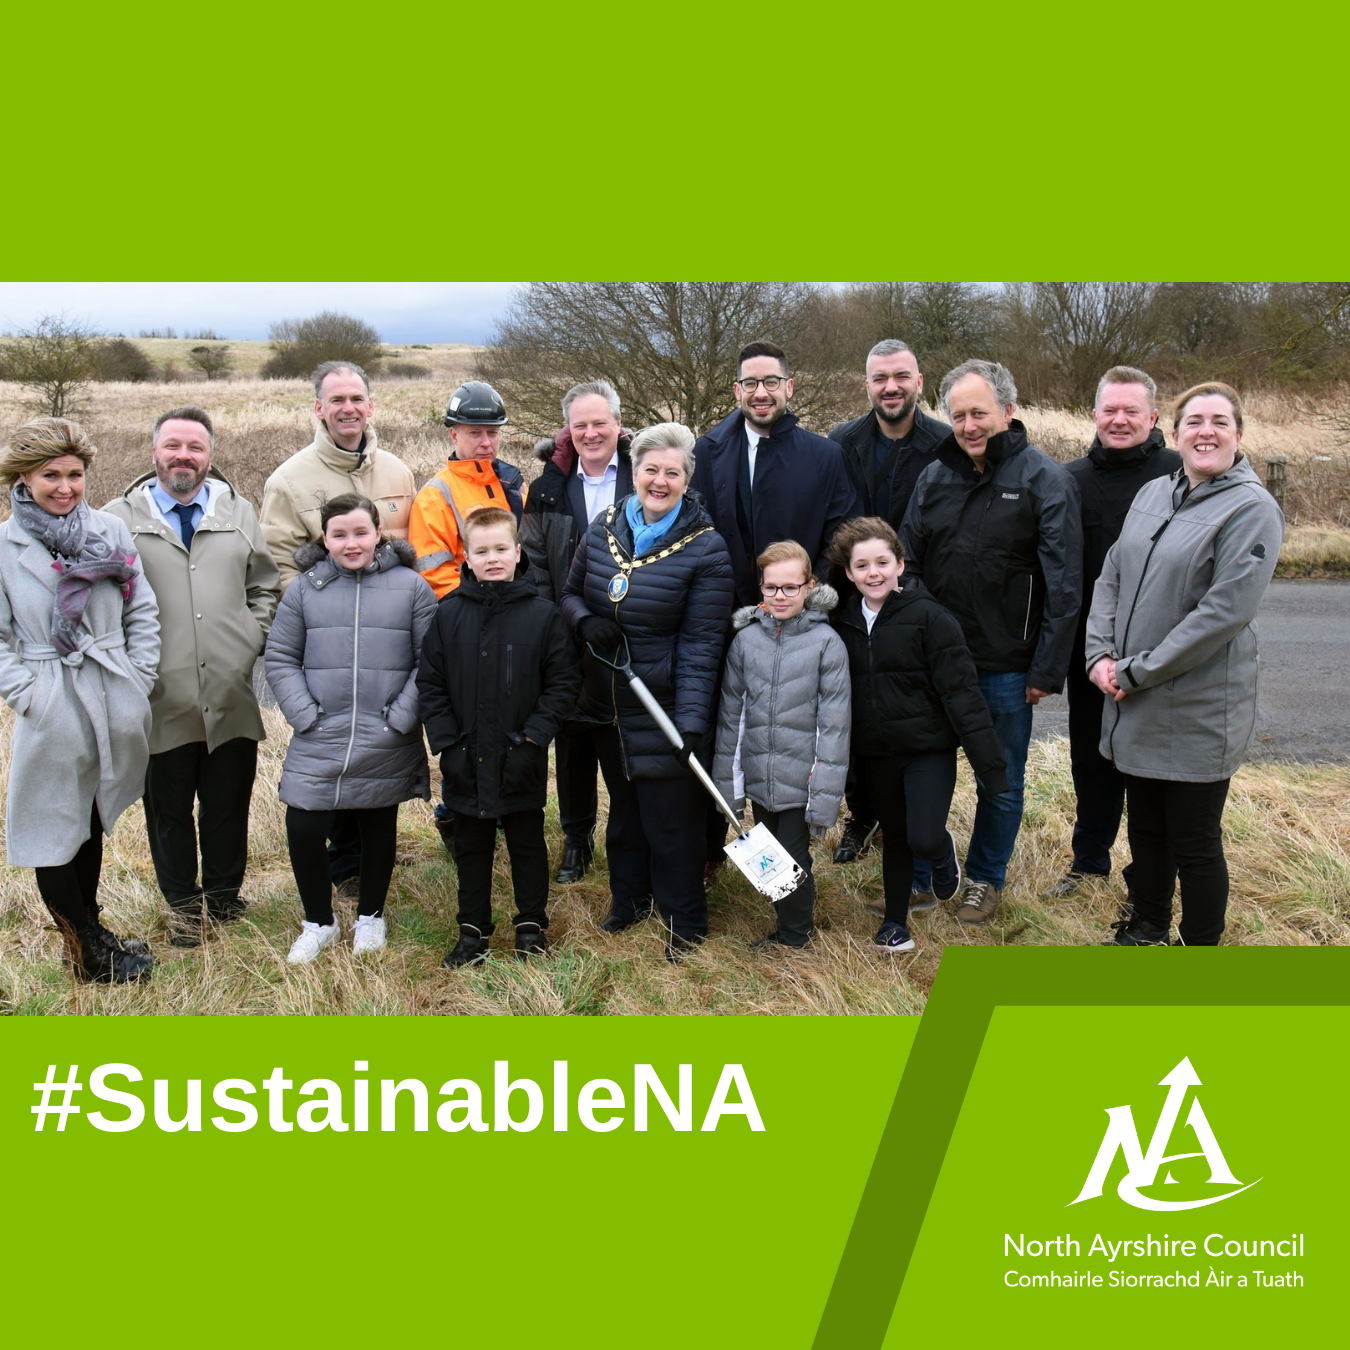 Sustainable North Ayrshire promo pic with Council logo and hashtag #SustainableNA with pic of Provost at ground-breaking for Council's first solar farm